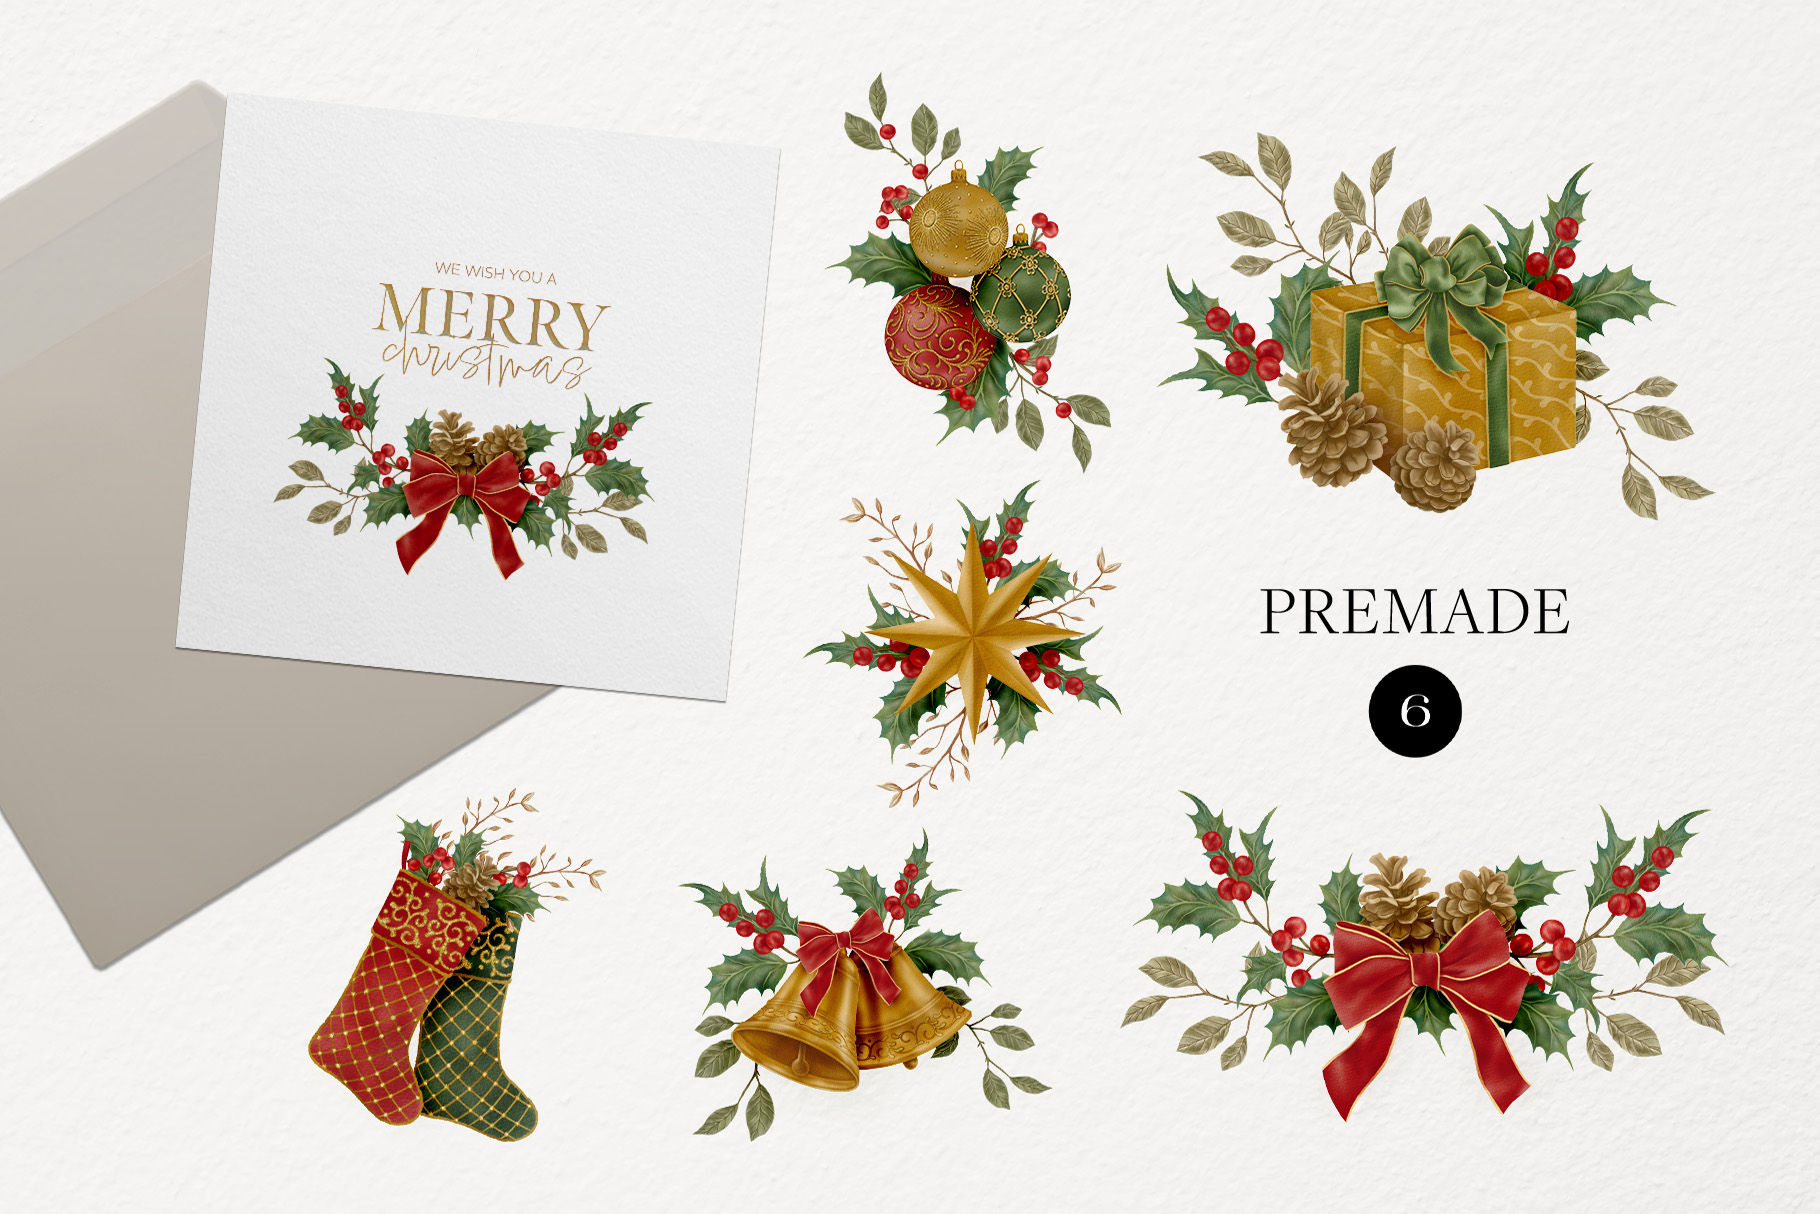 Christmas Watercolor Decorations (PSD, PNG Format)